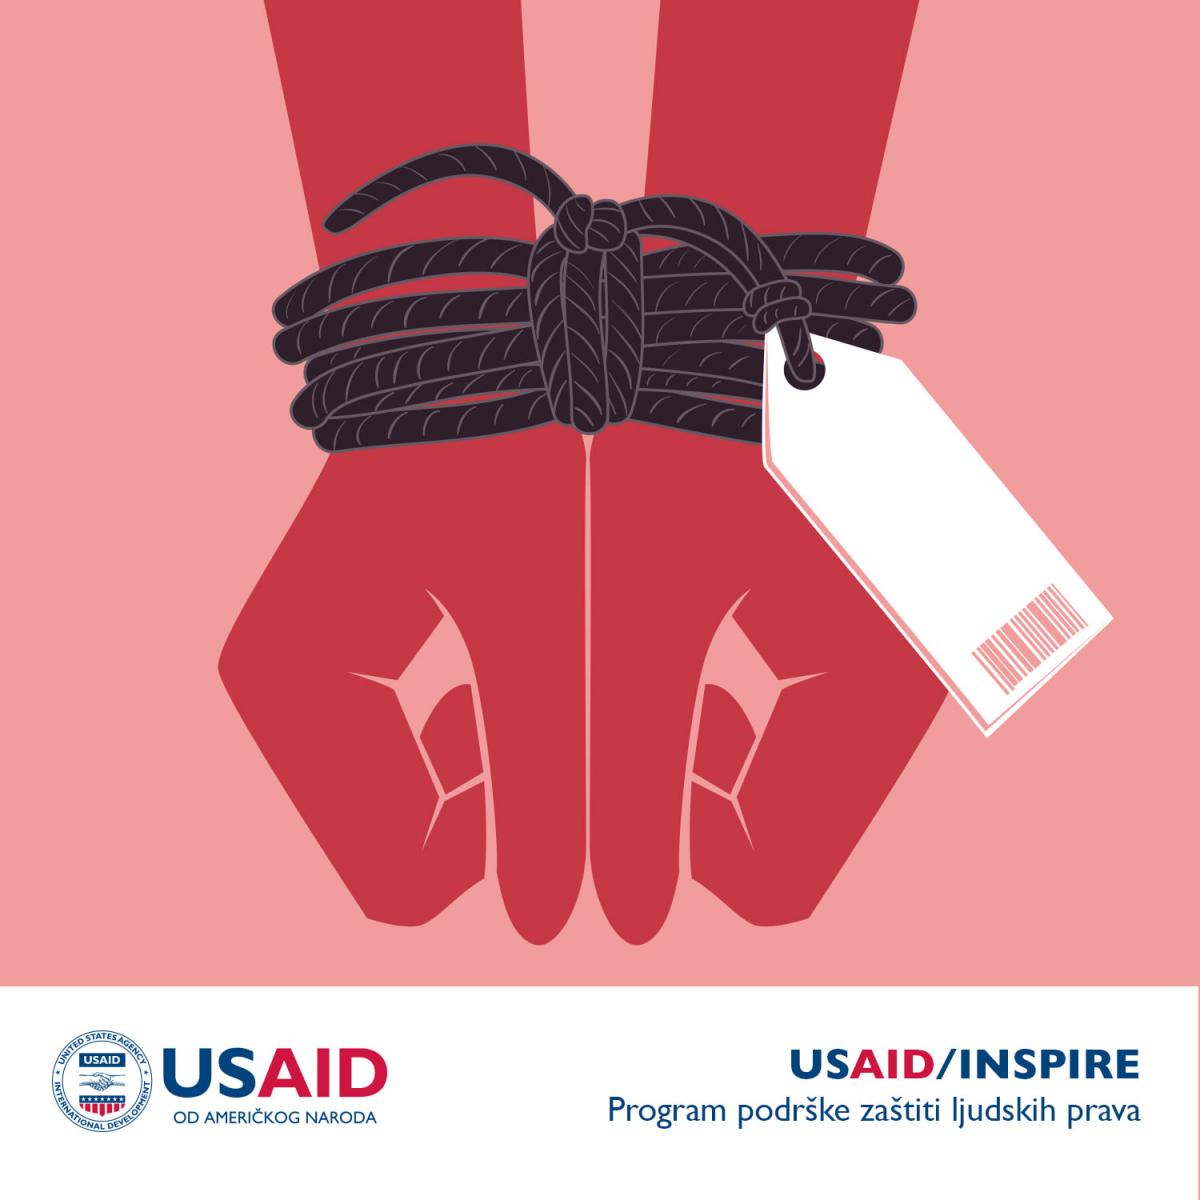 Graphic depiction promoting anti-human trafficking advocacy